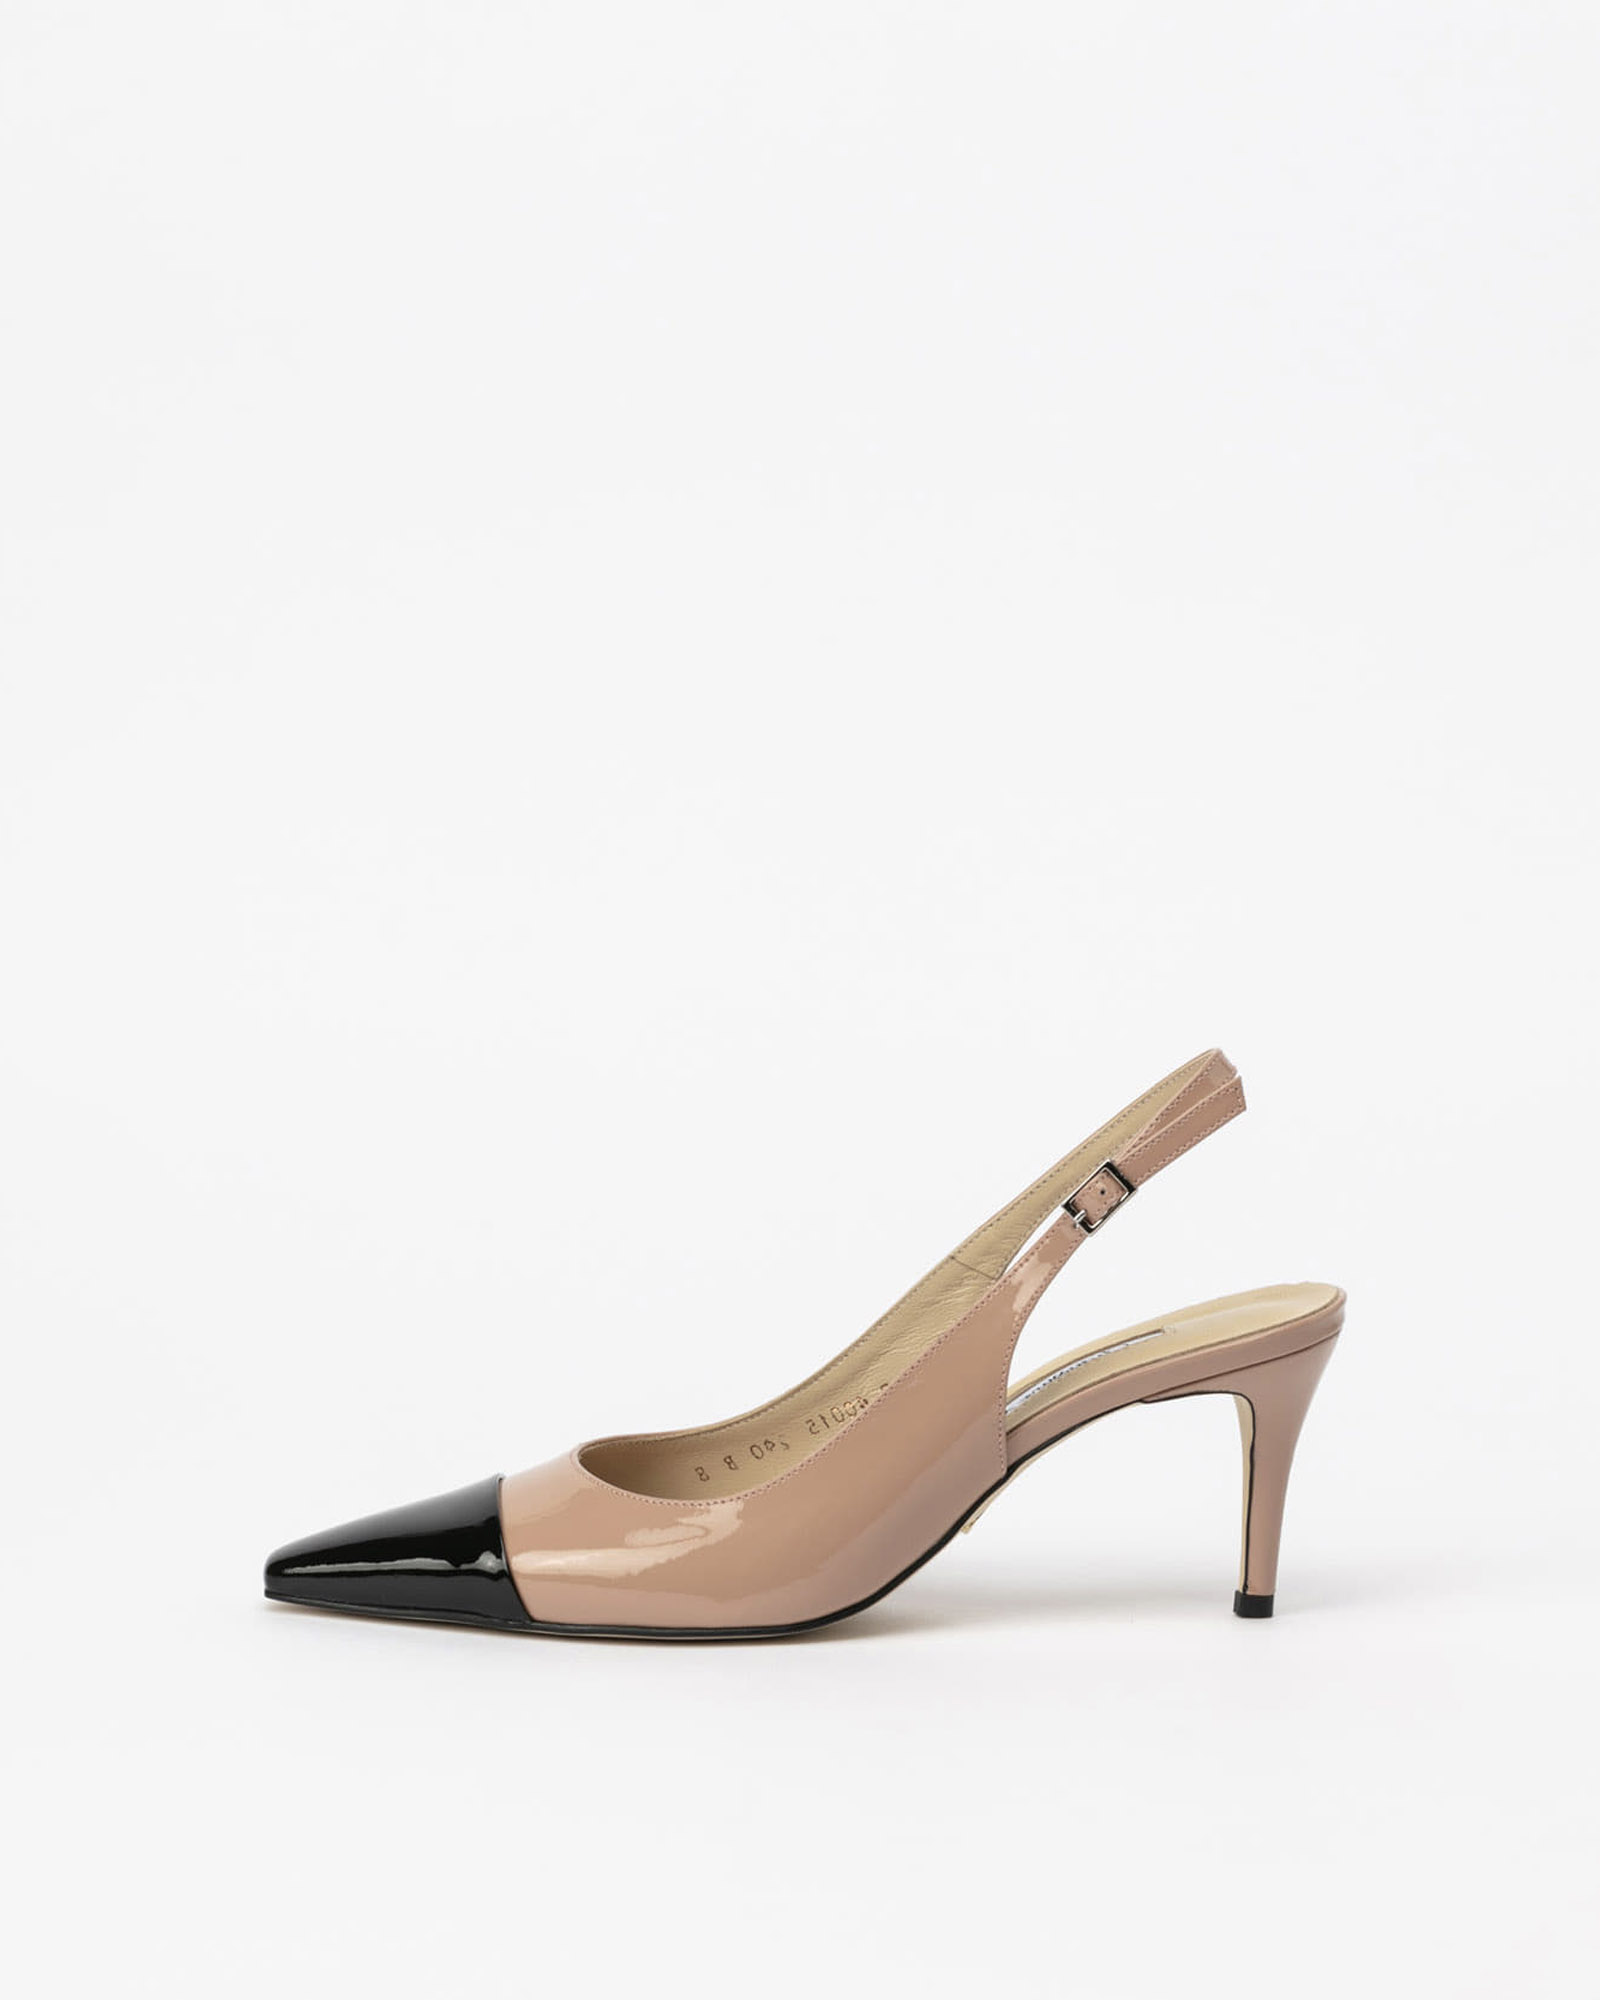 Kernell Slingbacks in NeoIndy Pink with Black Toe